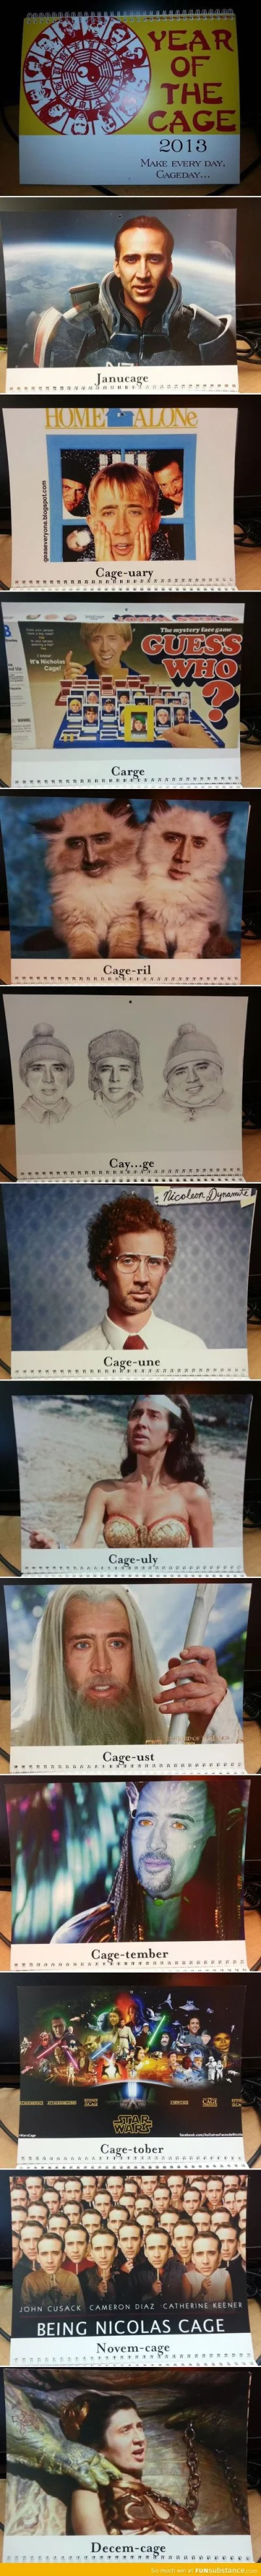 biuna - #cage #nicholas #kalendarz #humor



Year of the Cage,

Make every day, Caged...